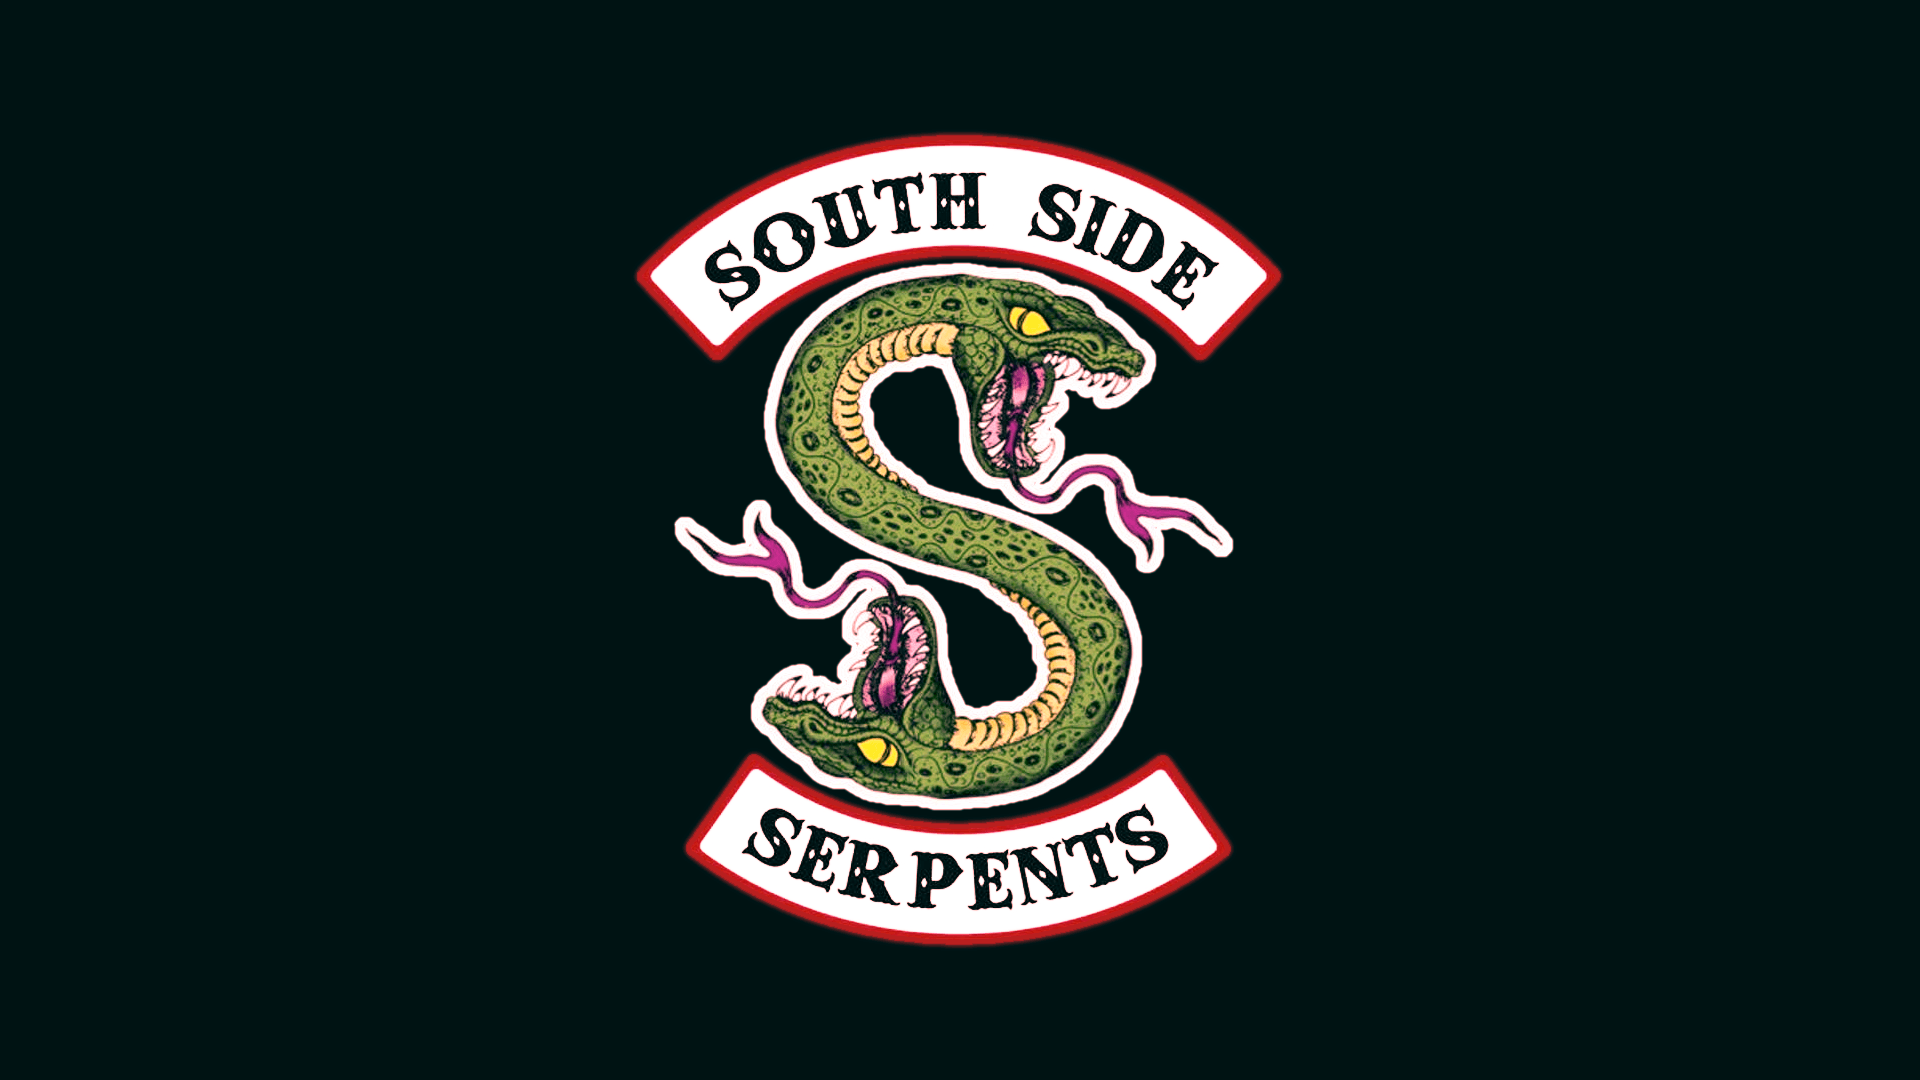 I made a South Side Serpents desktop wallpaper for you guys!